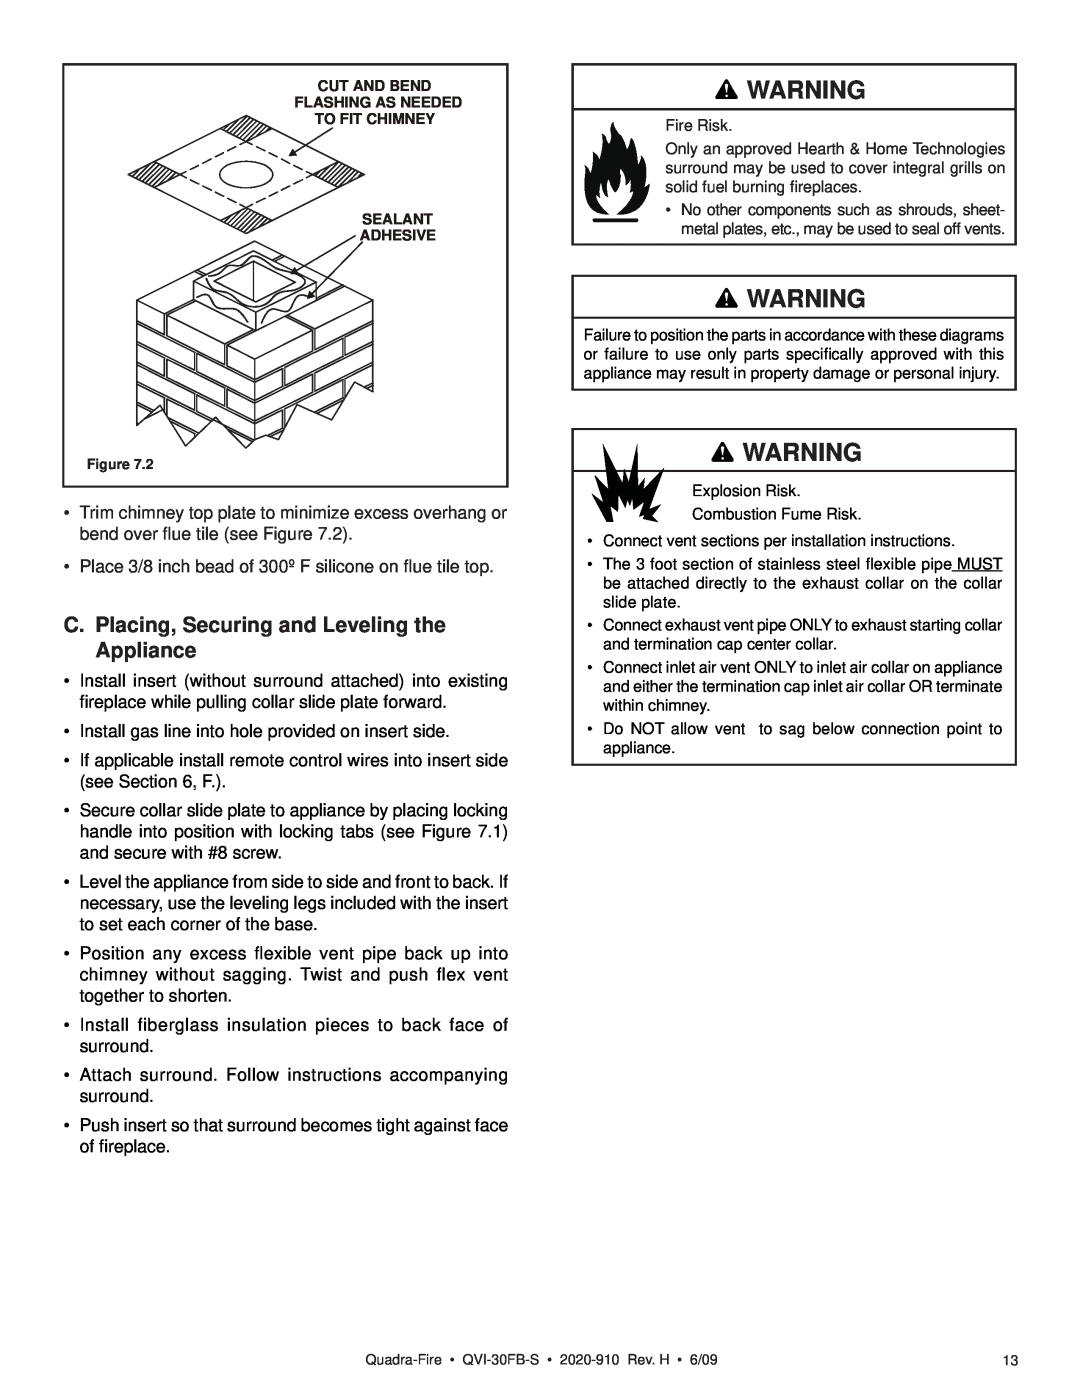 Quadra-Fire QVI-30FB-S owner manual C.Placing, Securing and Leveling the Appliance 